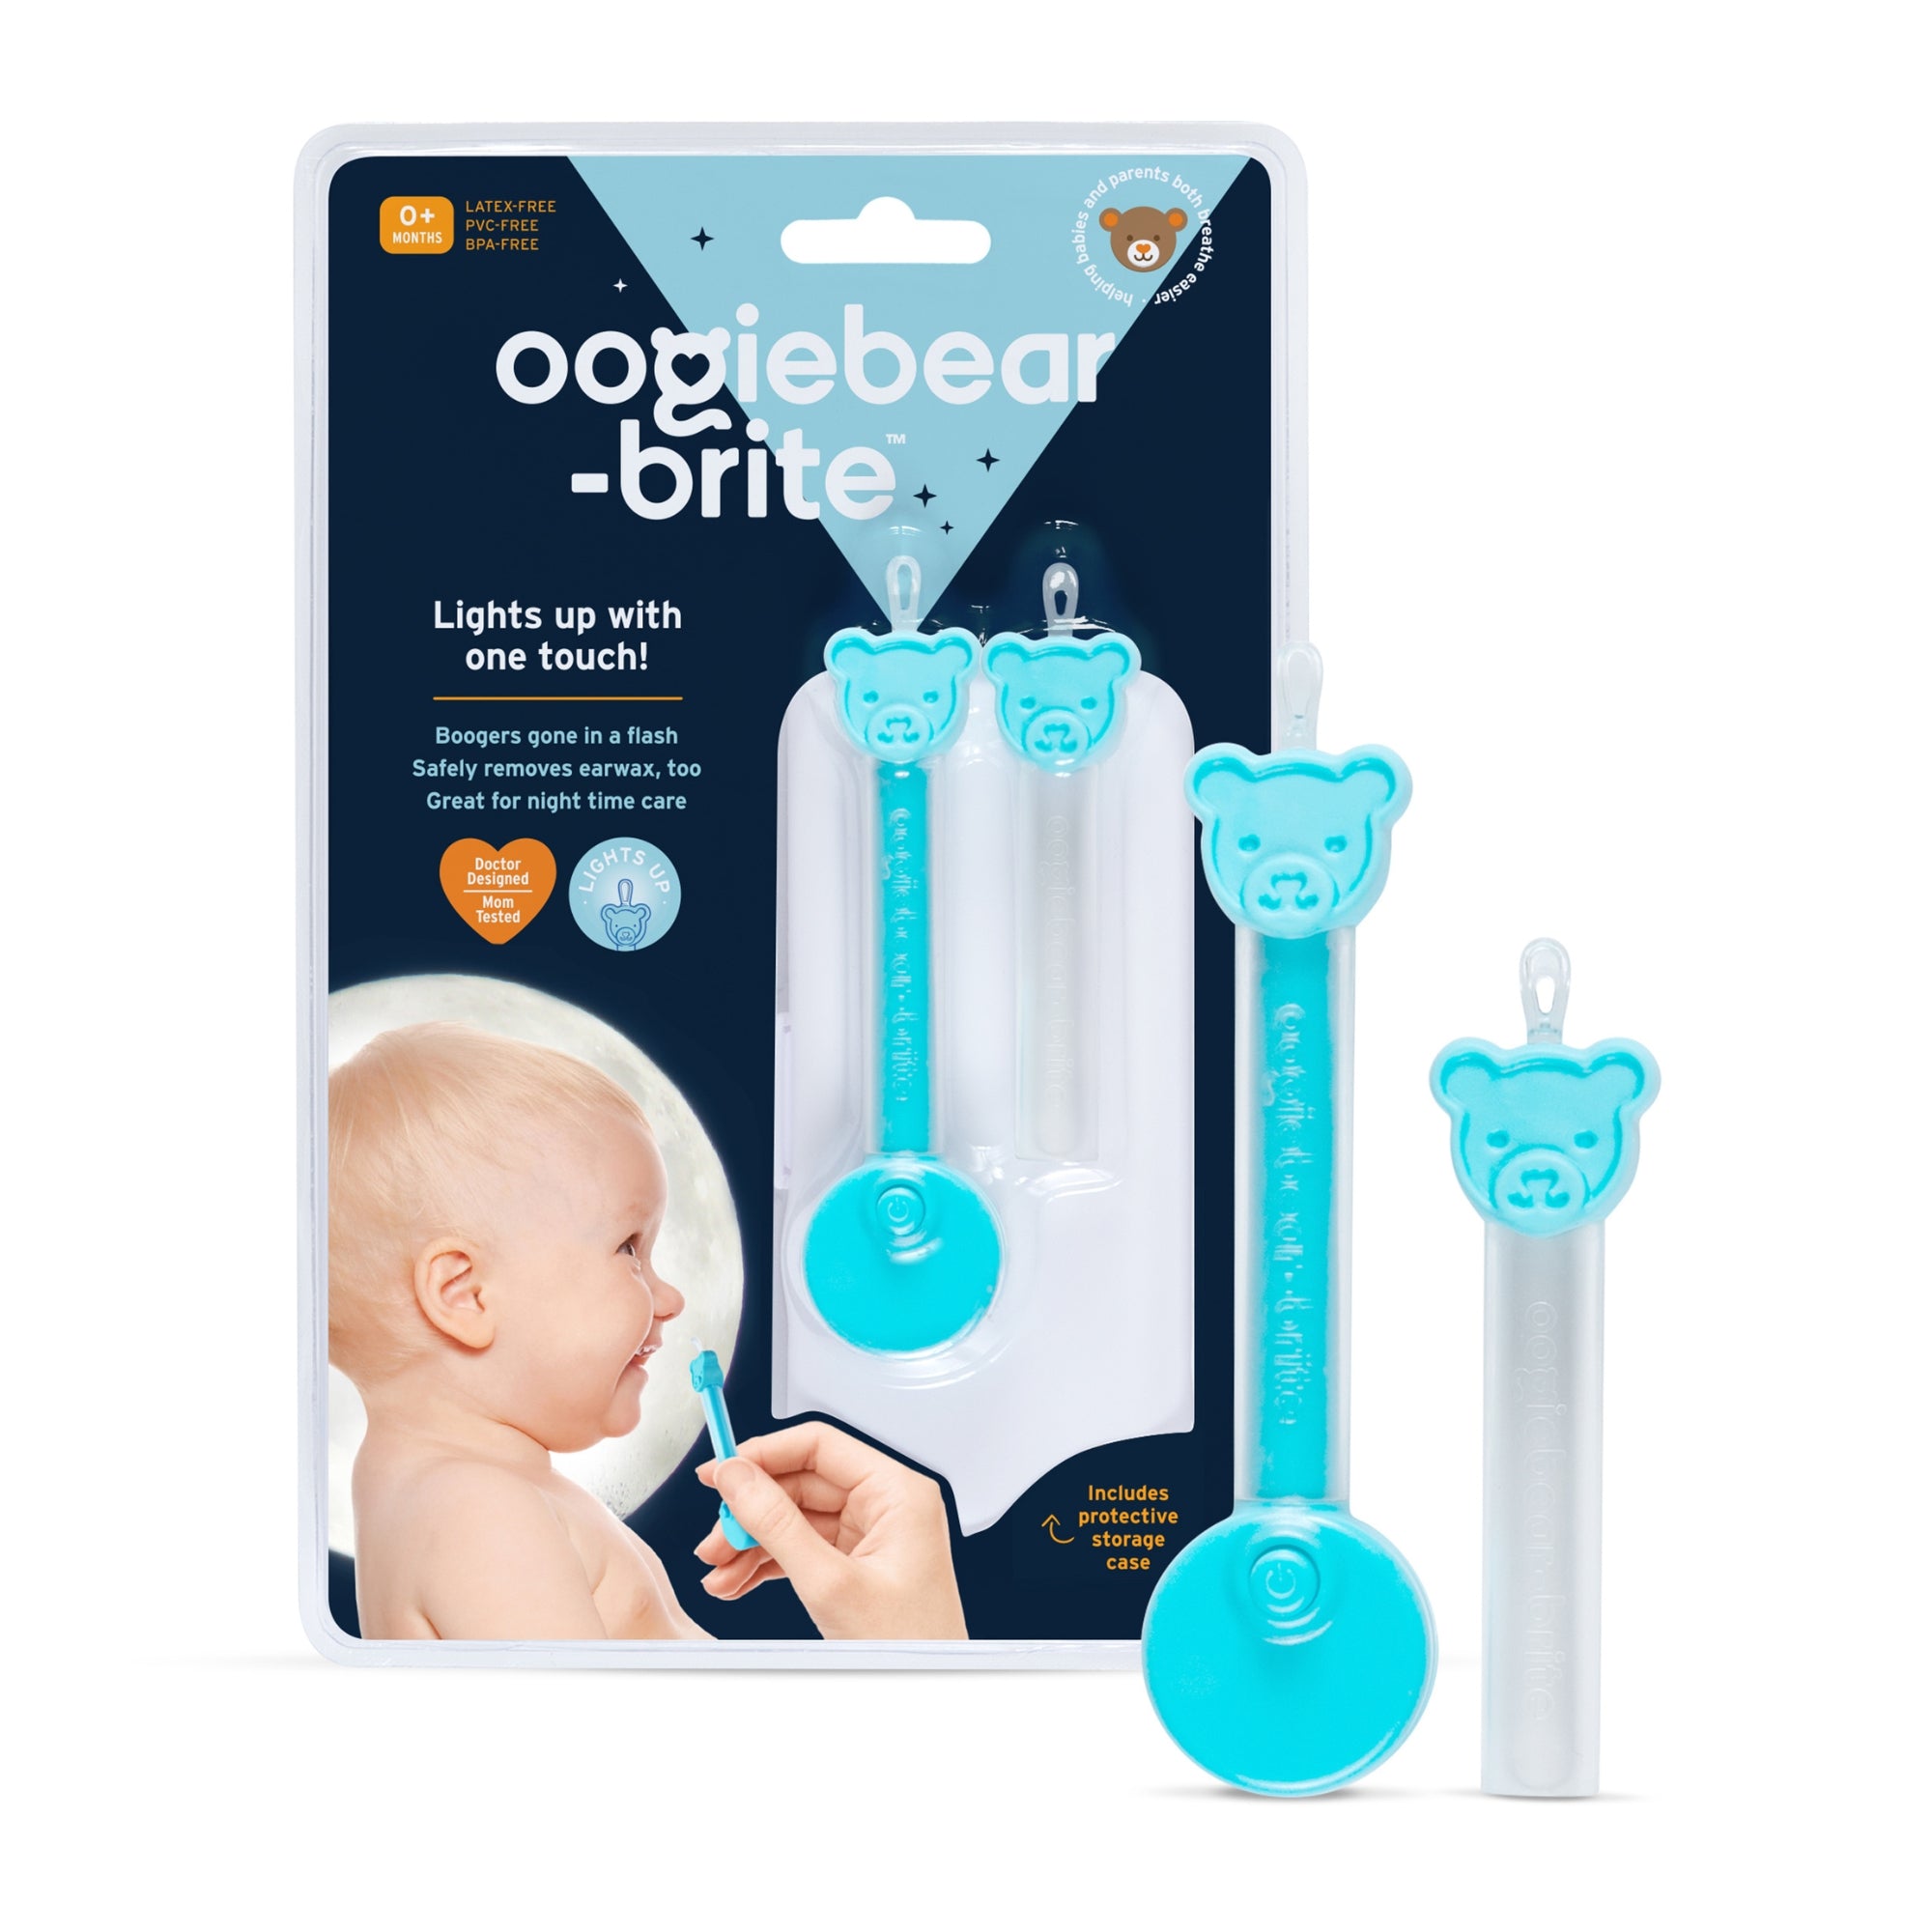 Oogiebear oogiebear - Patented Nose and Ear Gadget. Safe, Easy